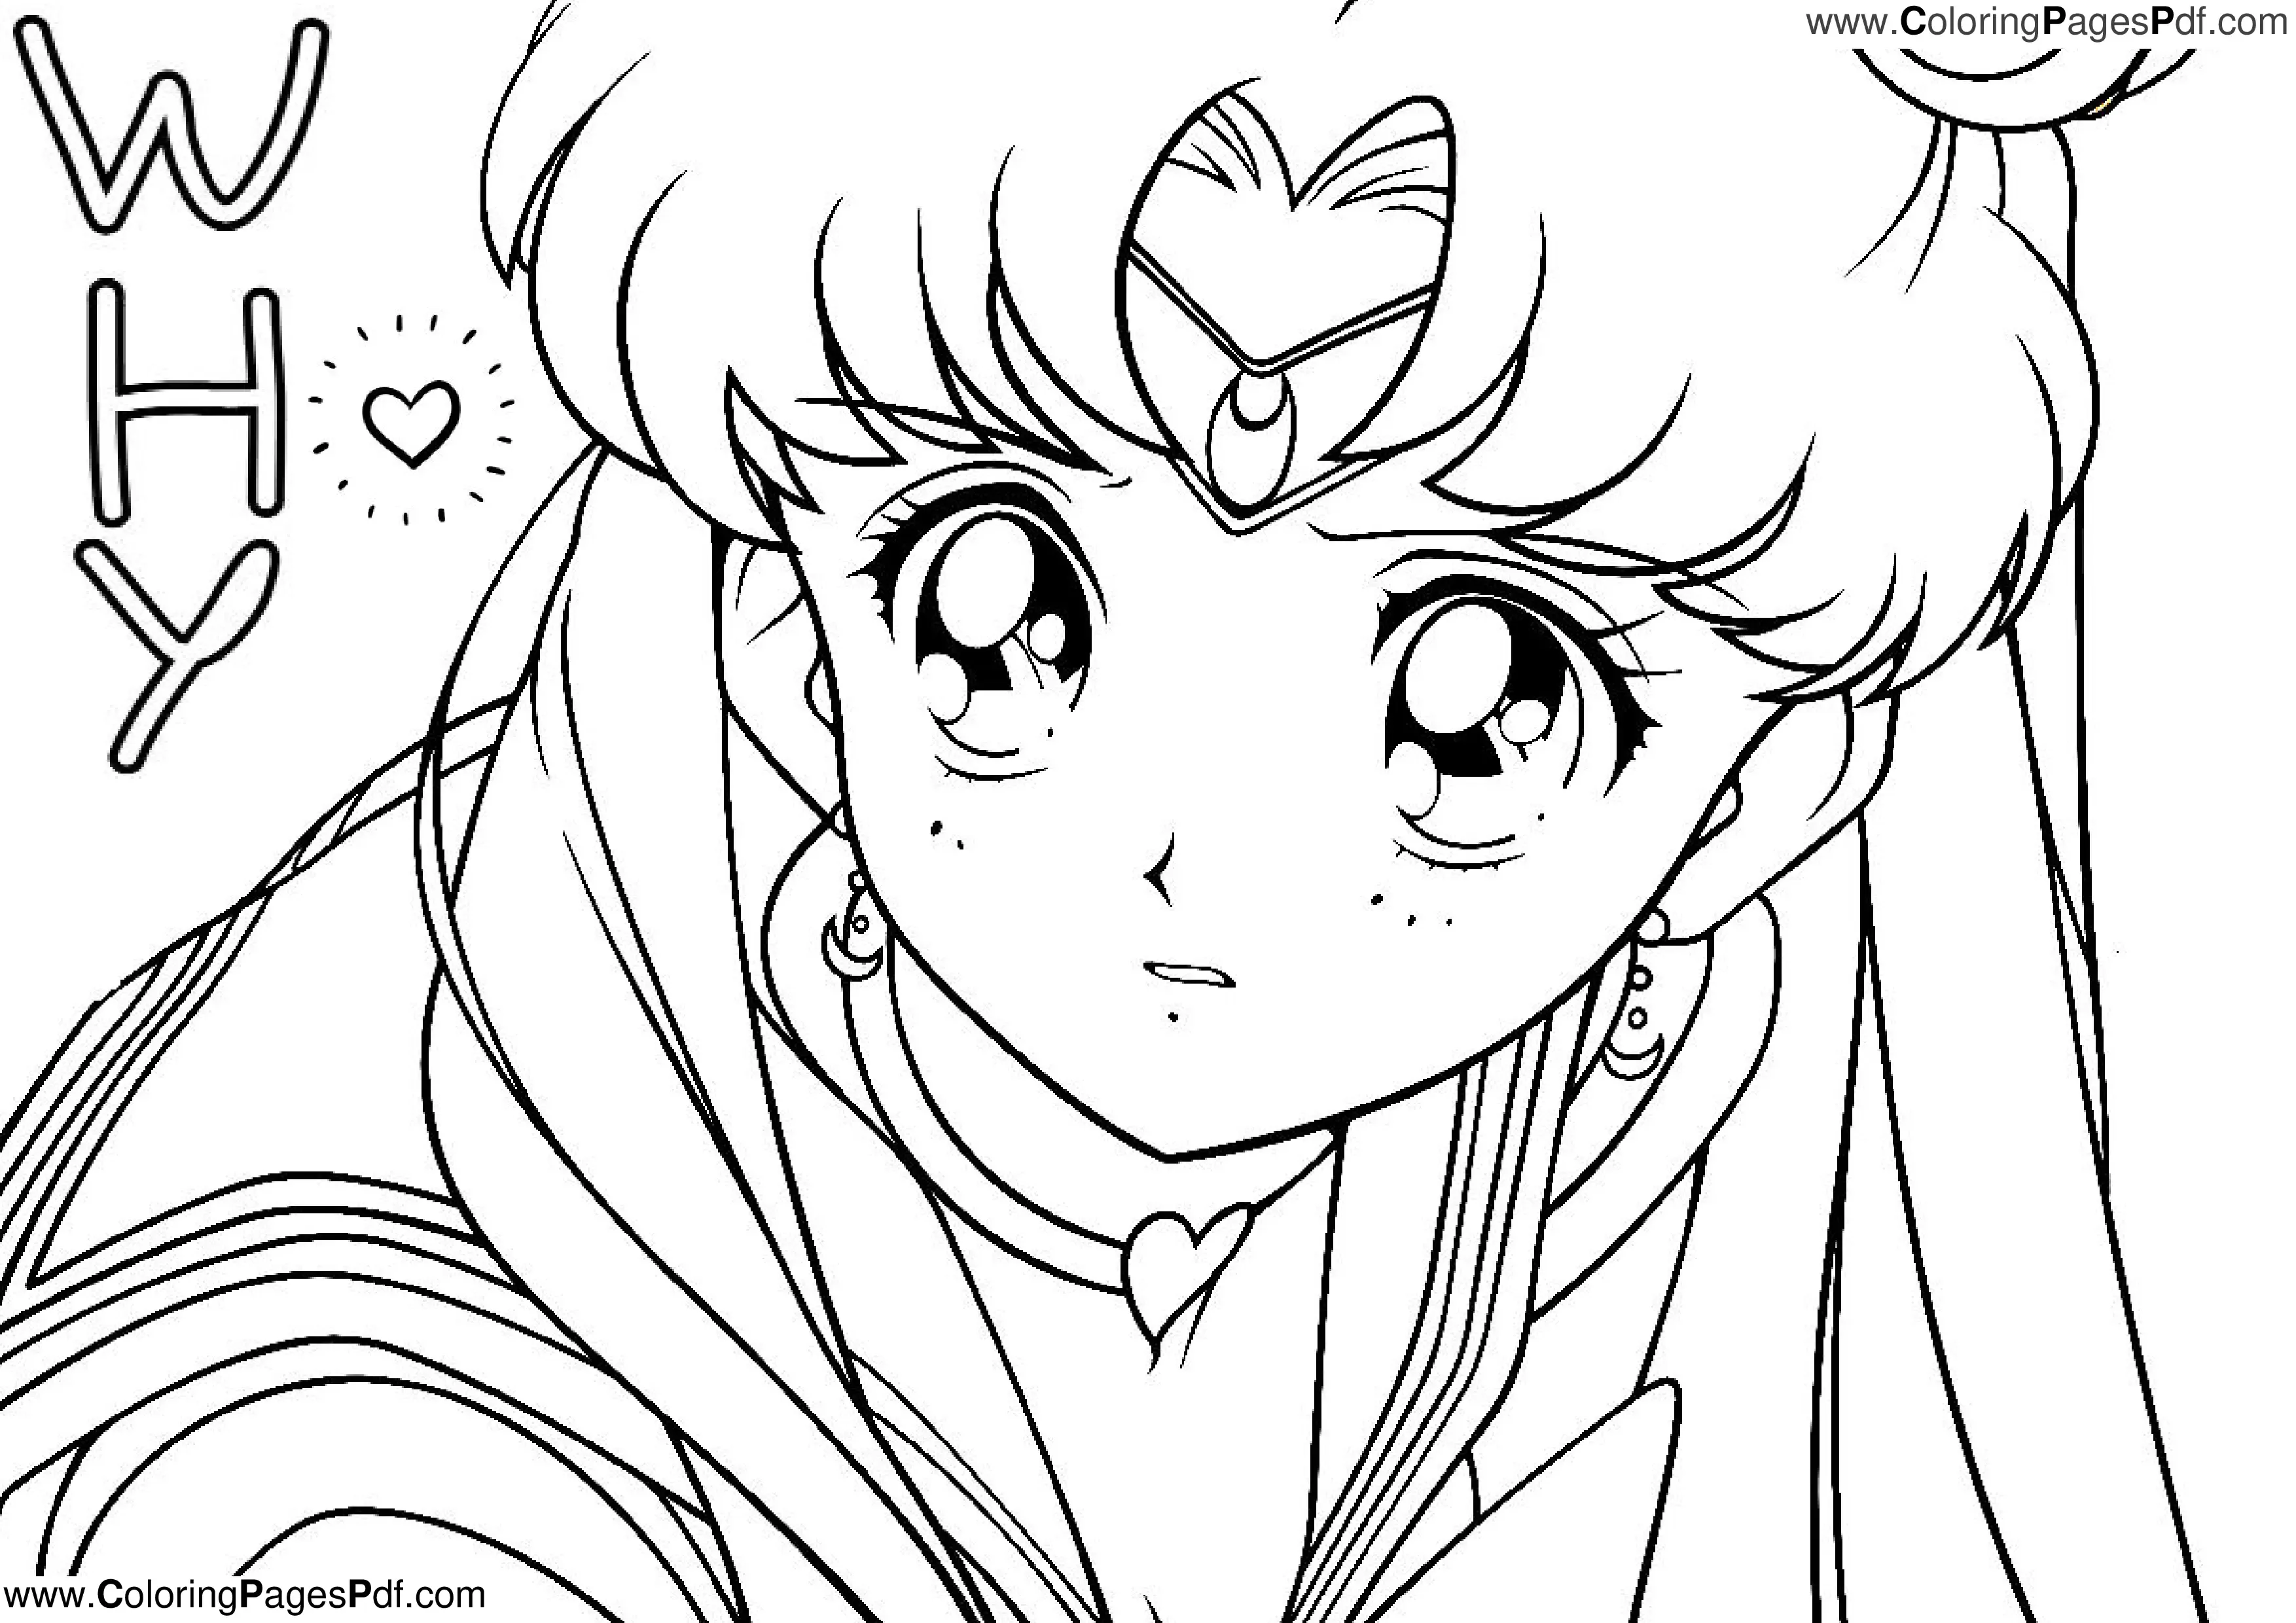 Sailor moon coloring pages free